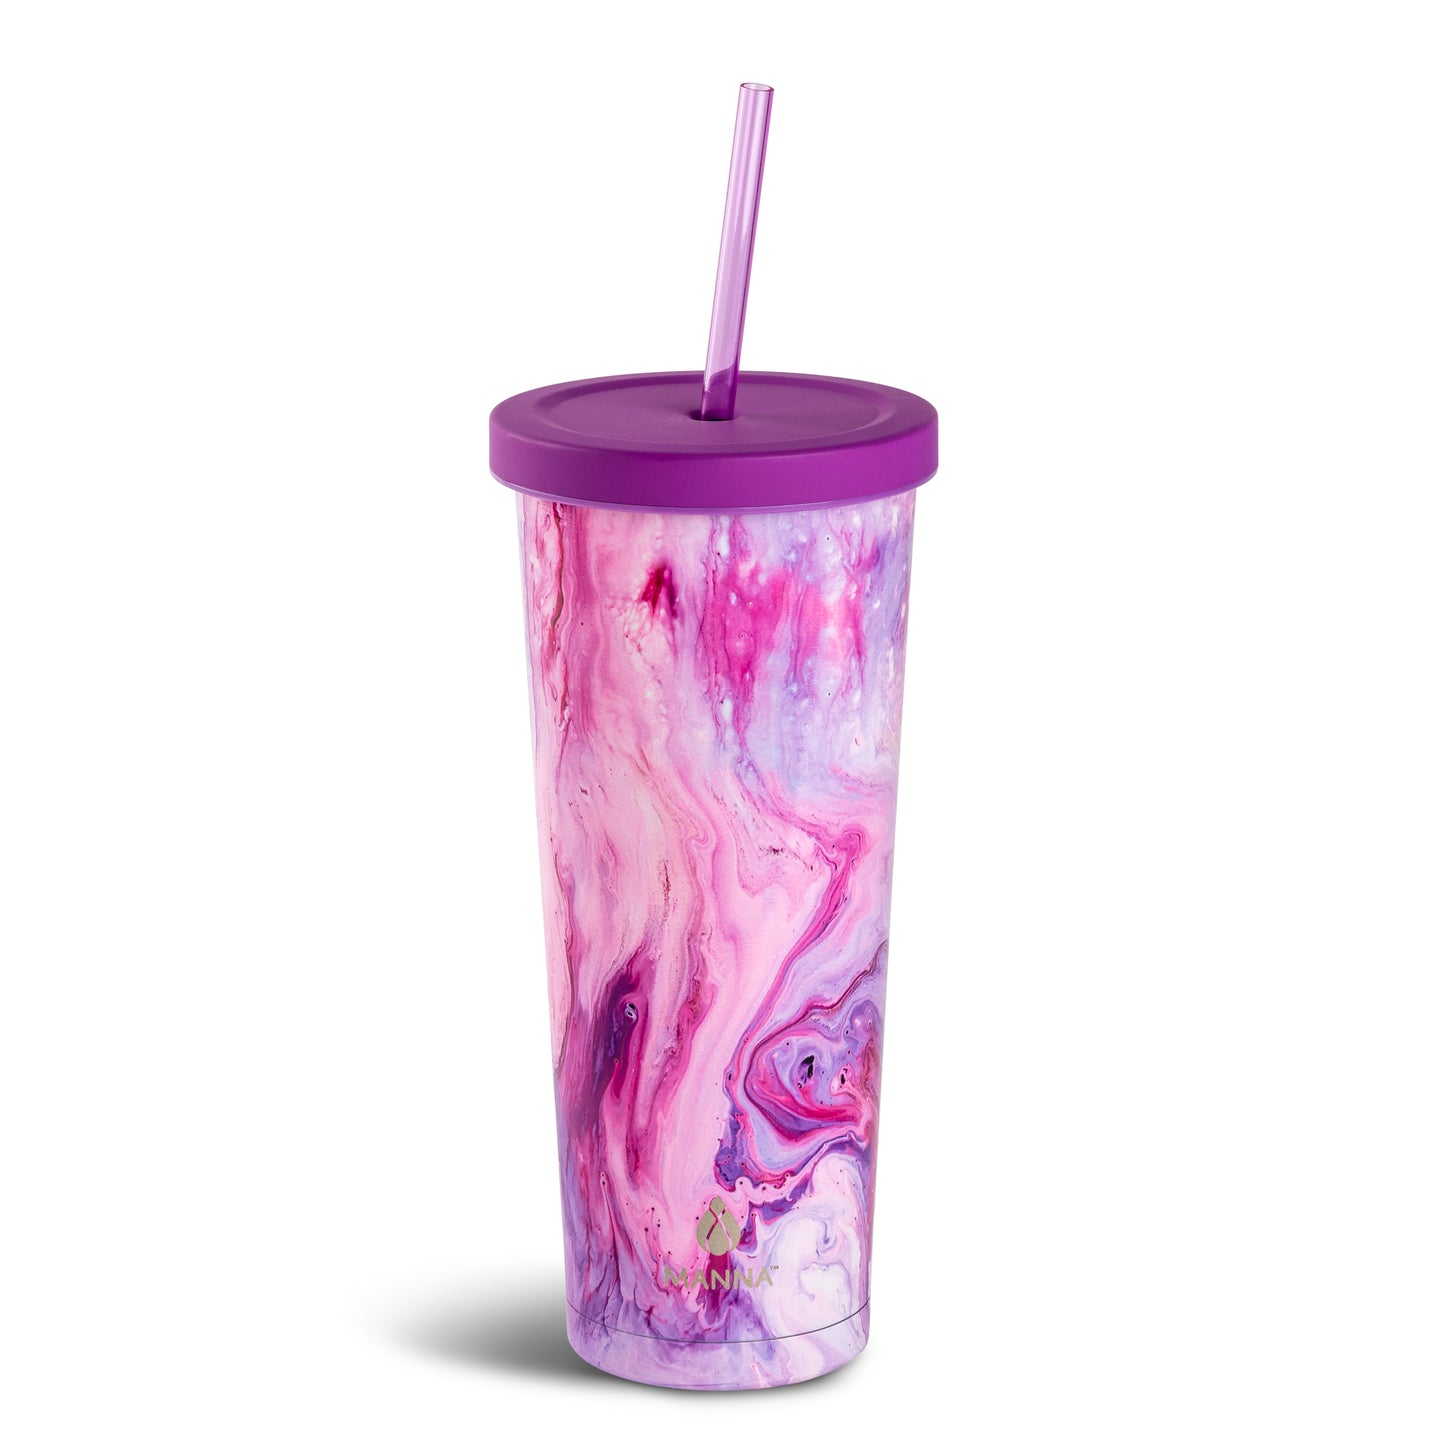 Manna Pink Rubberized Studded Tumbler